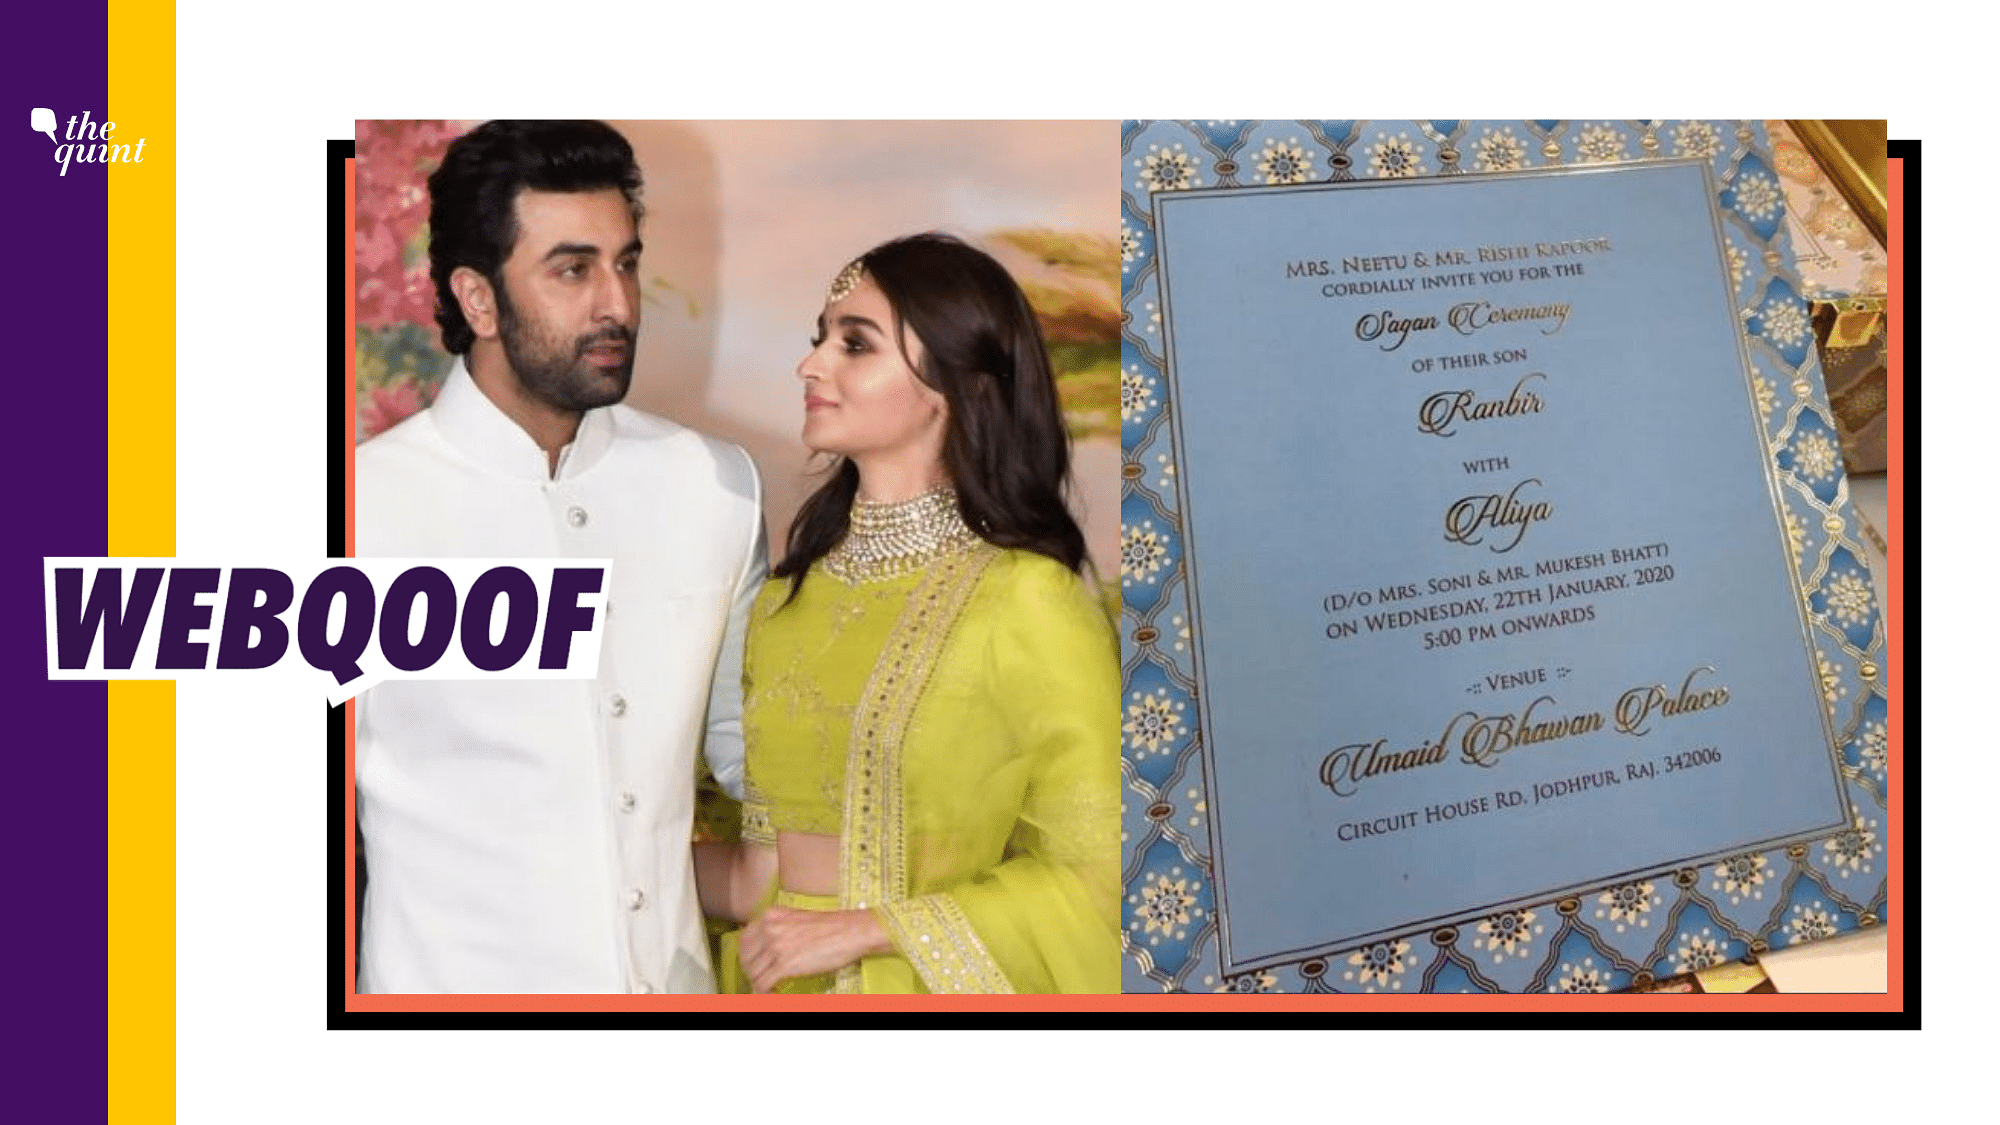 A fake invitation claims that Ranbit Kapoor and Alia Bhatt are set to get married on 22 January 2020.&nbsp;